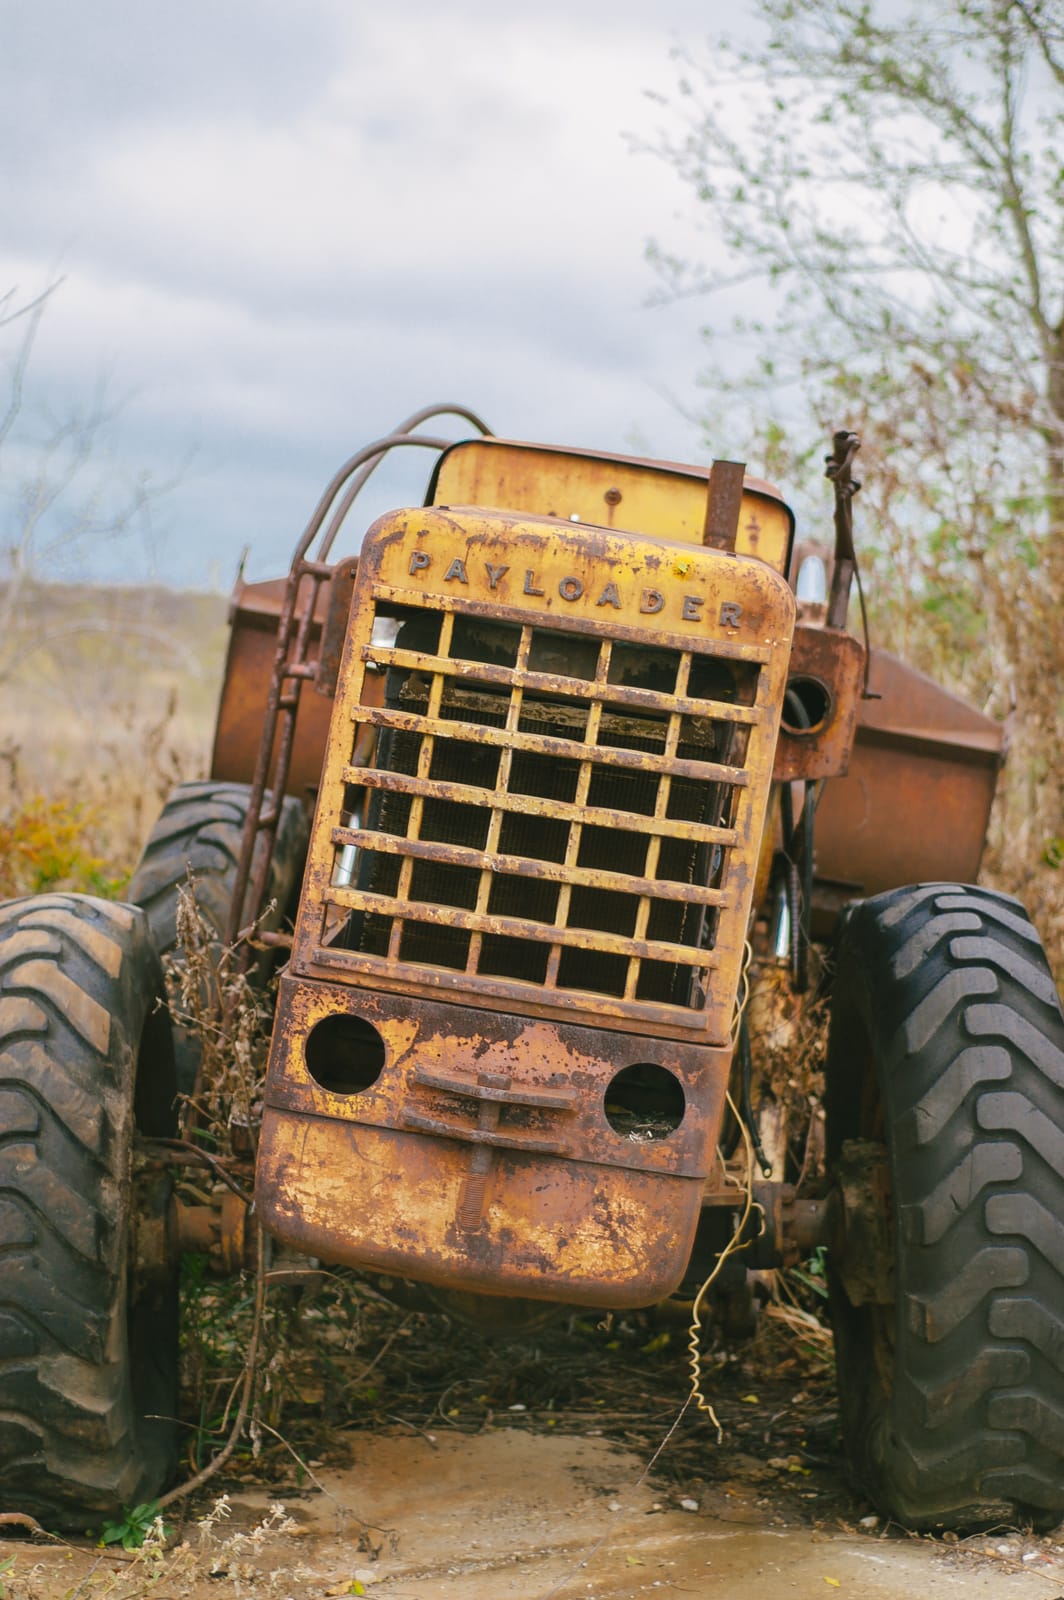 An abandoned antique International Payloader traactor